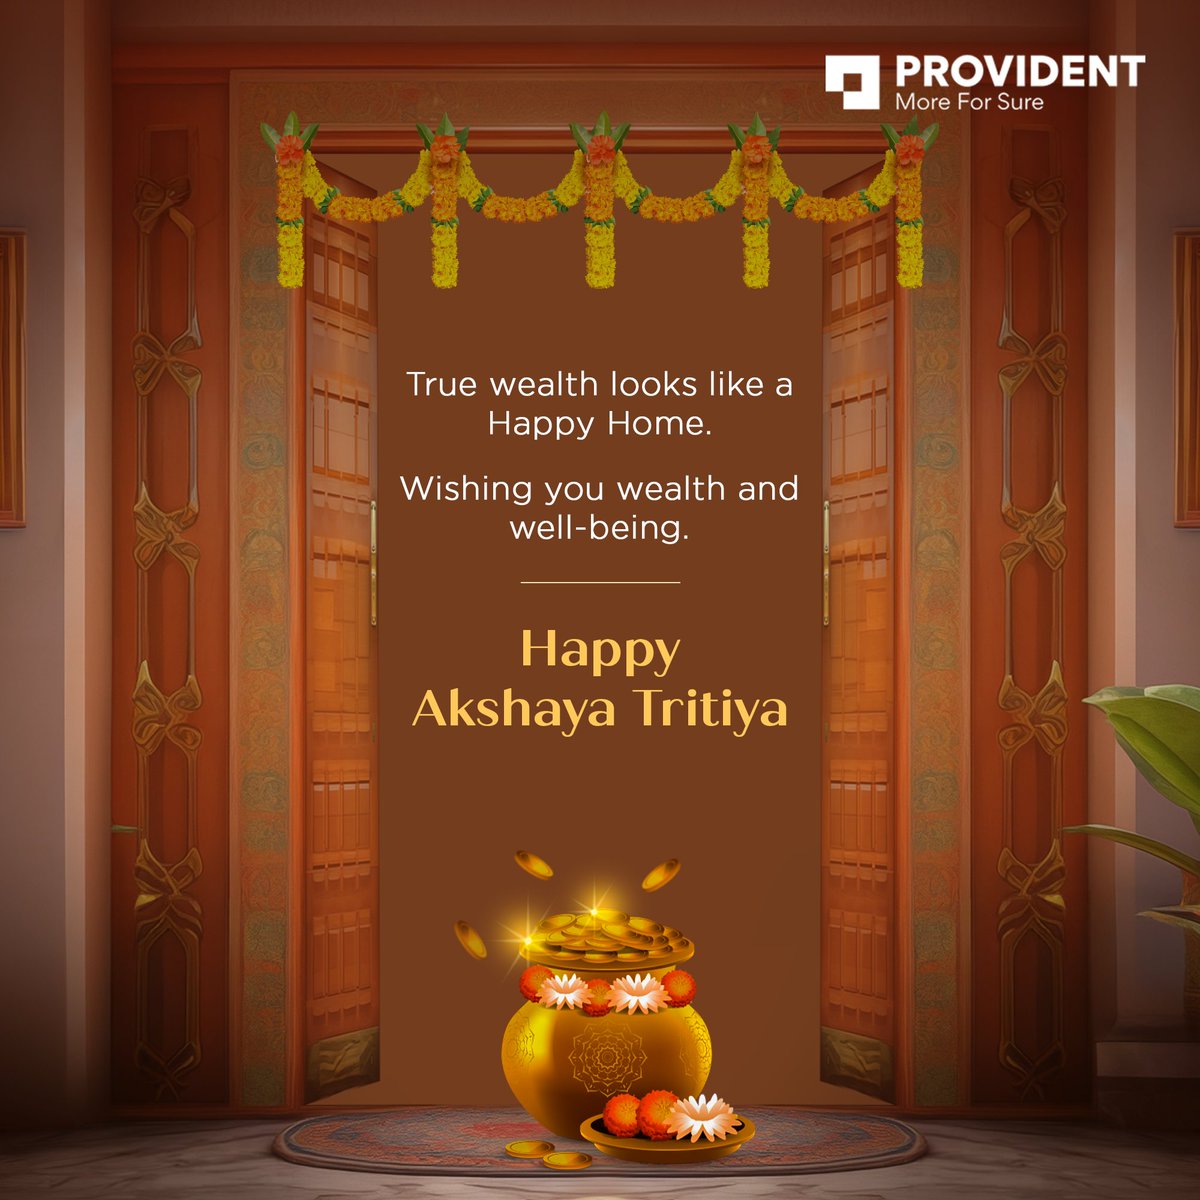 The greatest wealth of all is a home filled with laughter, good health, and family. Wishing you an abundance of happiness and joy on the auspicious occasion of Akshaya Tritya.

#ProvidentHousing #MoreForSure #AkshayaTritya #Festival #FestiveCelebration